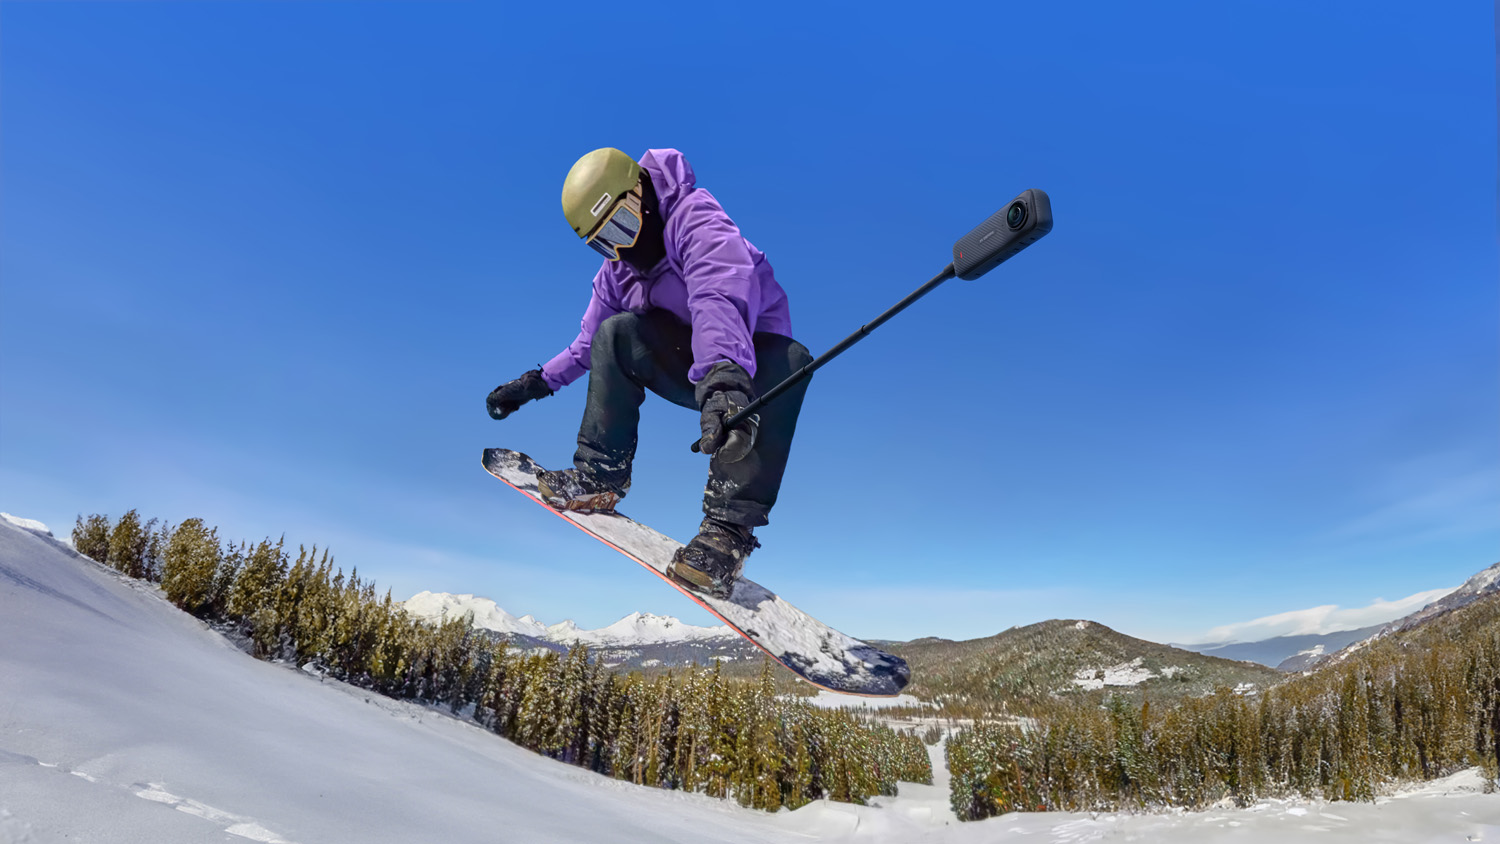 A snowboarder in mid-air during a jump, wearing a purple jacket and snow pants, with a helmet and goggles, and a 360-degree camera attached to the end of a selfie stick, with snowy mountains in the background.